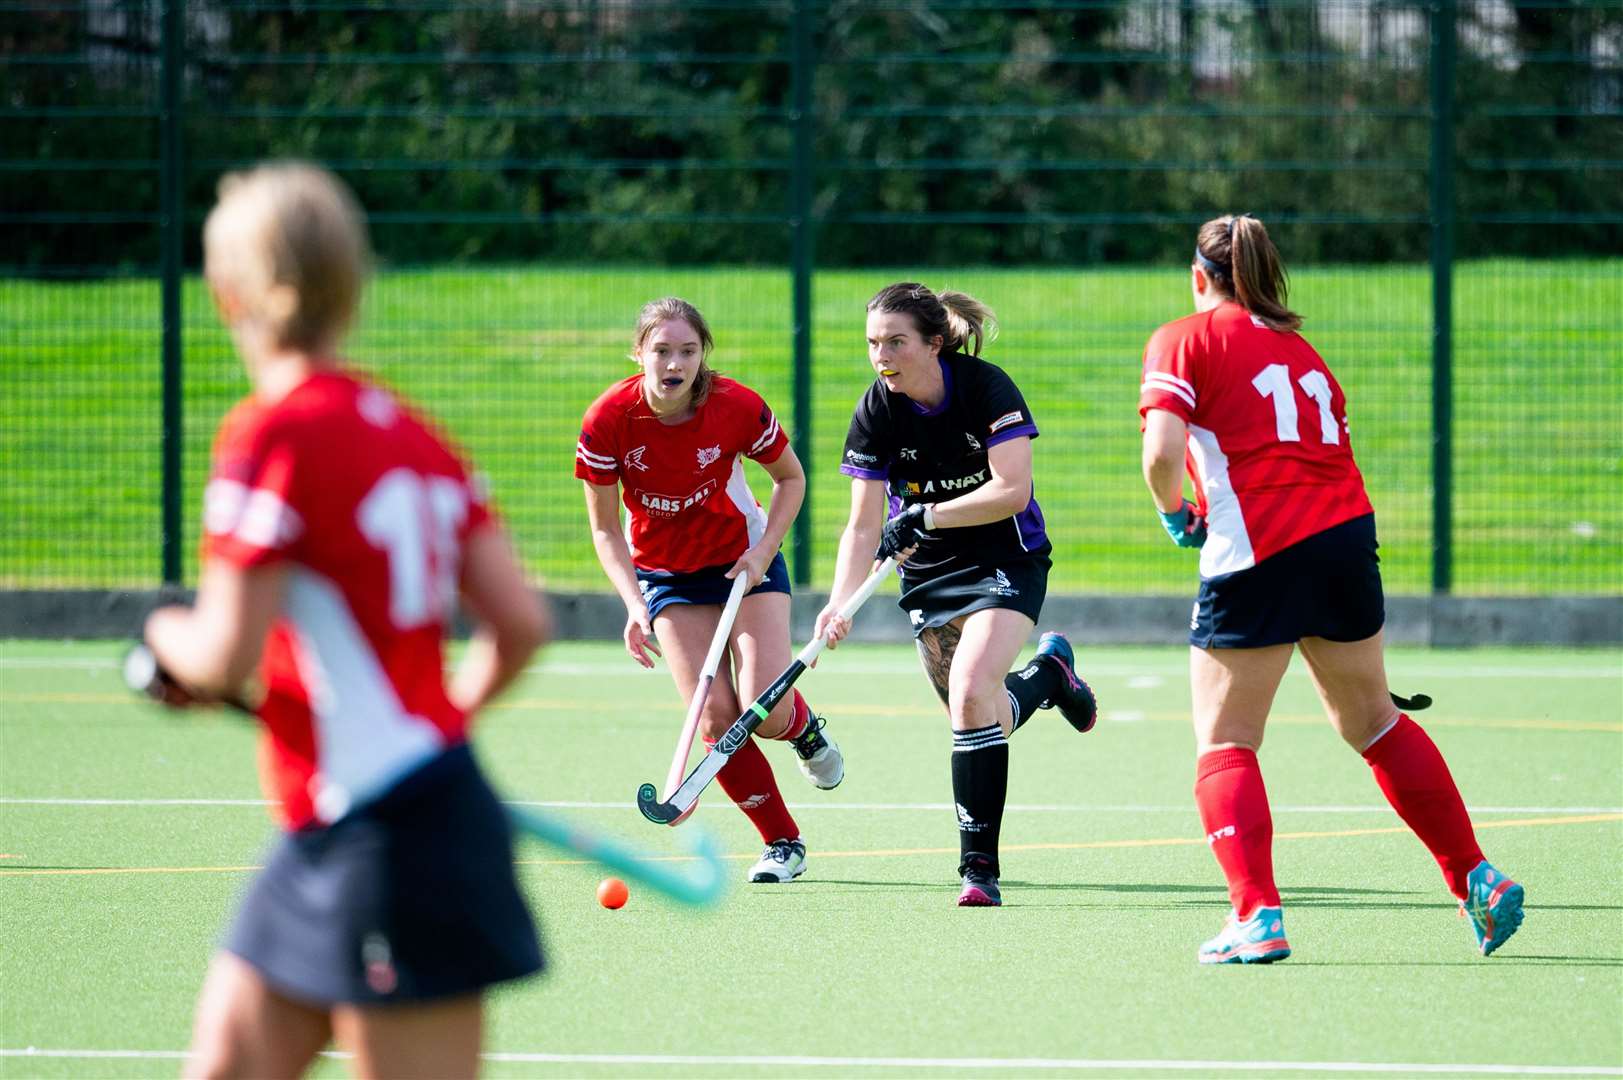 Pelicans Ladies against City of Peterborough 3rds at Alive Lynnsport. Picture: Ian Burt